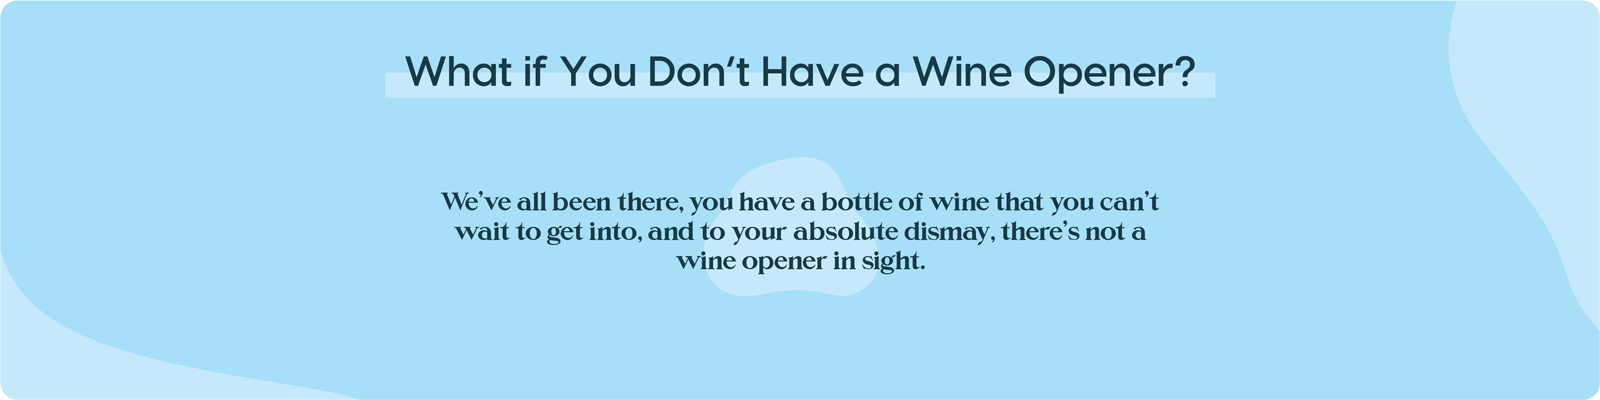 Light Blue Background with Text Overlaid: What if you don't have a wine opener? We've all been there, you have a bottle of wine that you can't wait to get into, and to your absolute dismay, there's not a wine opener in sight